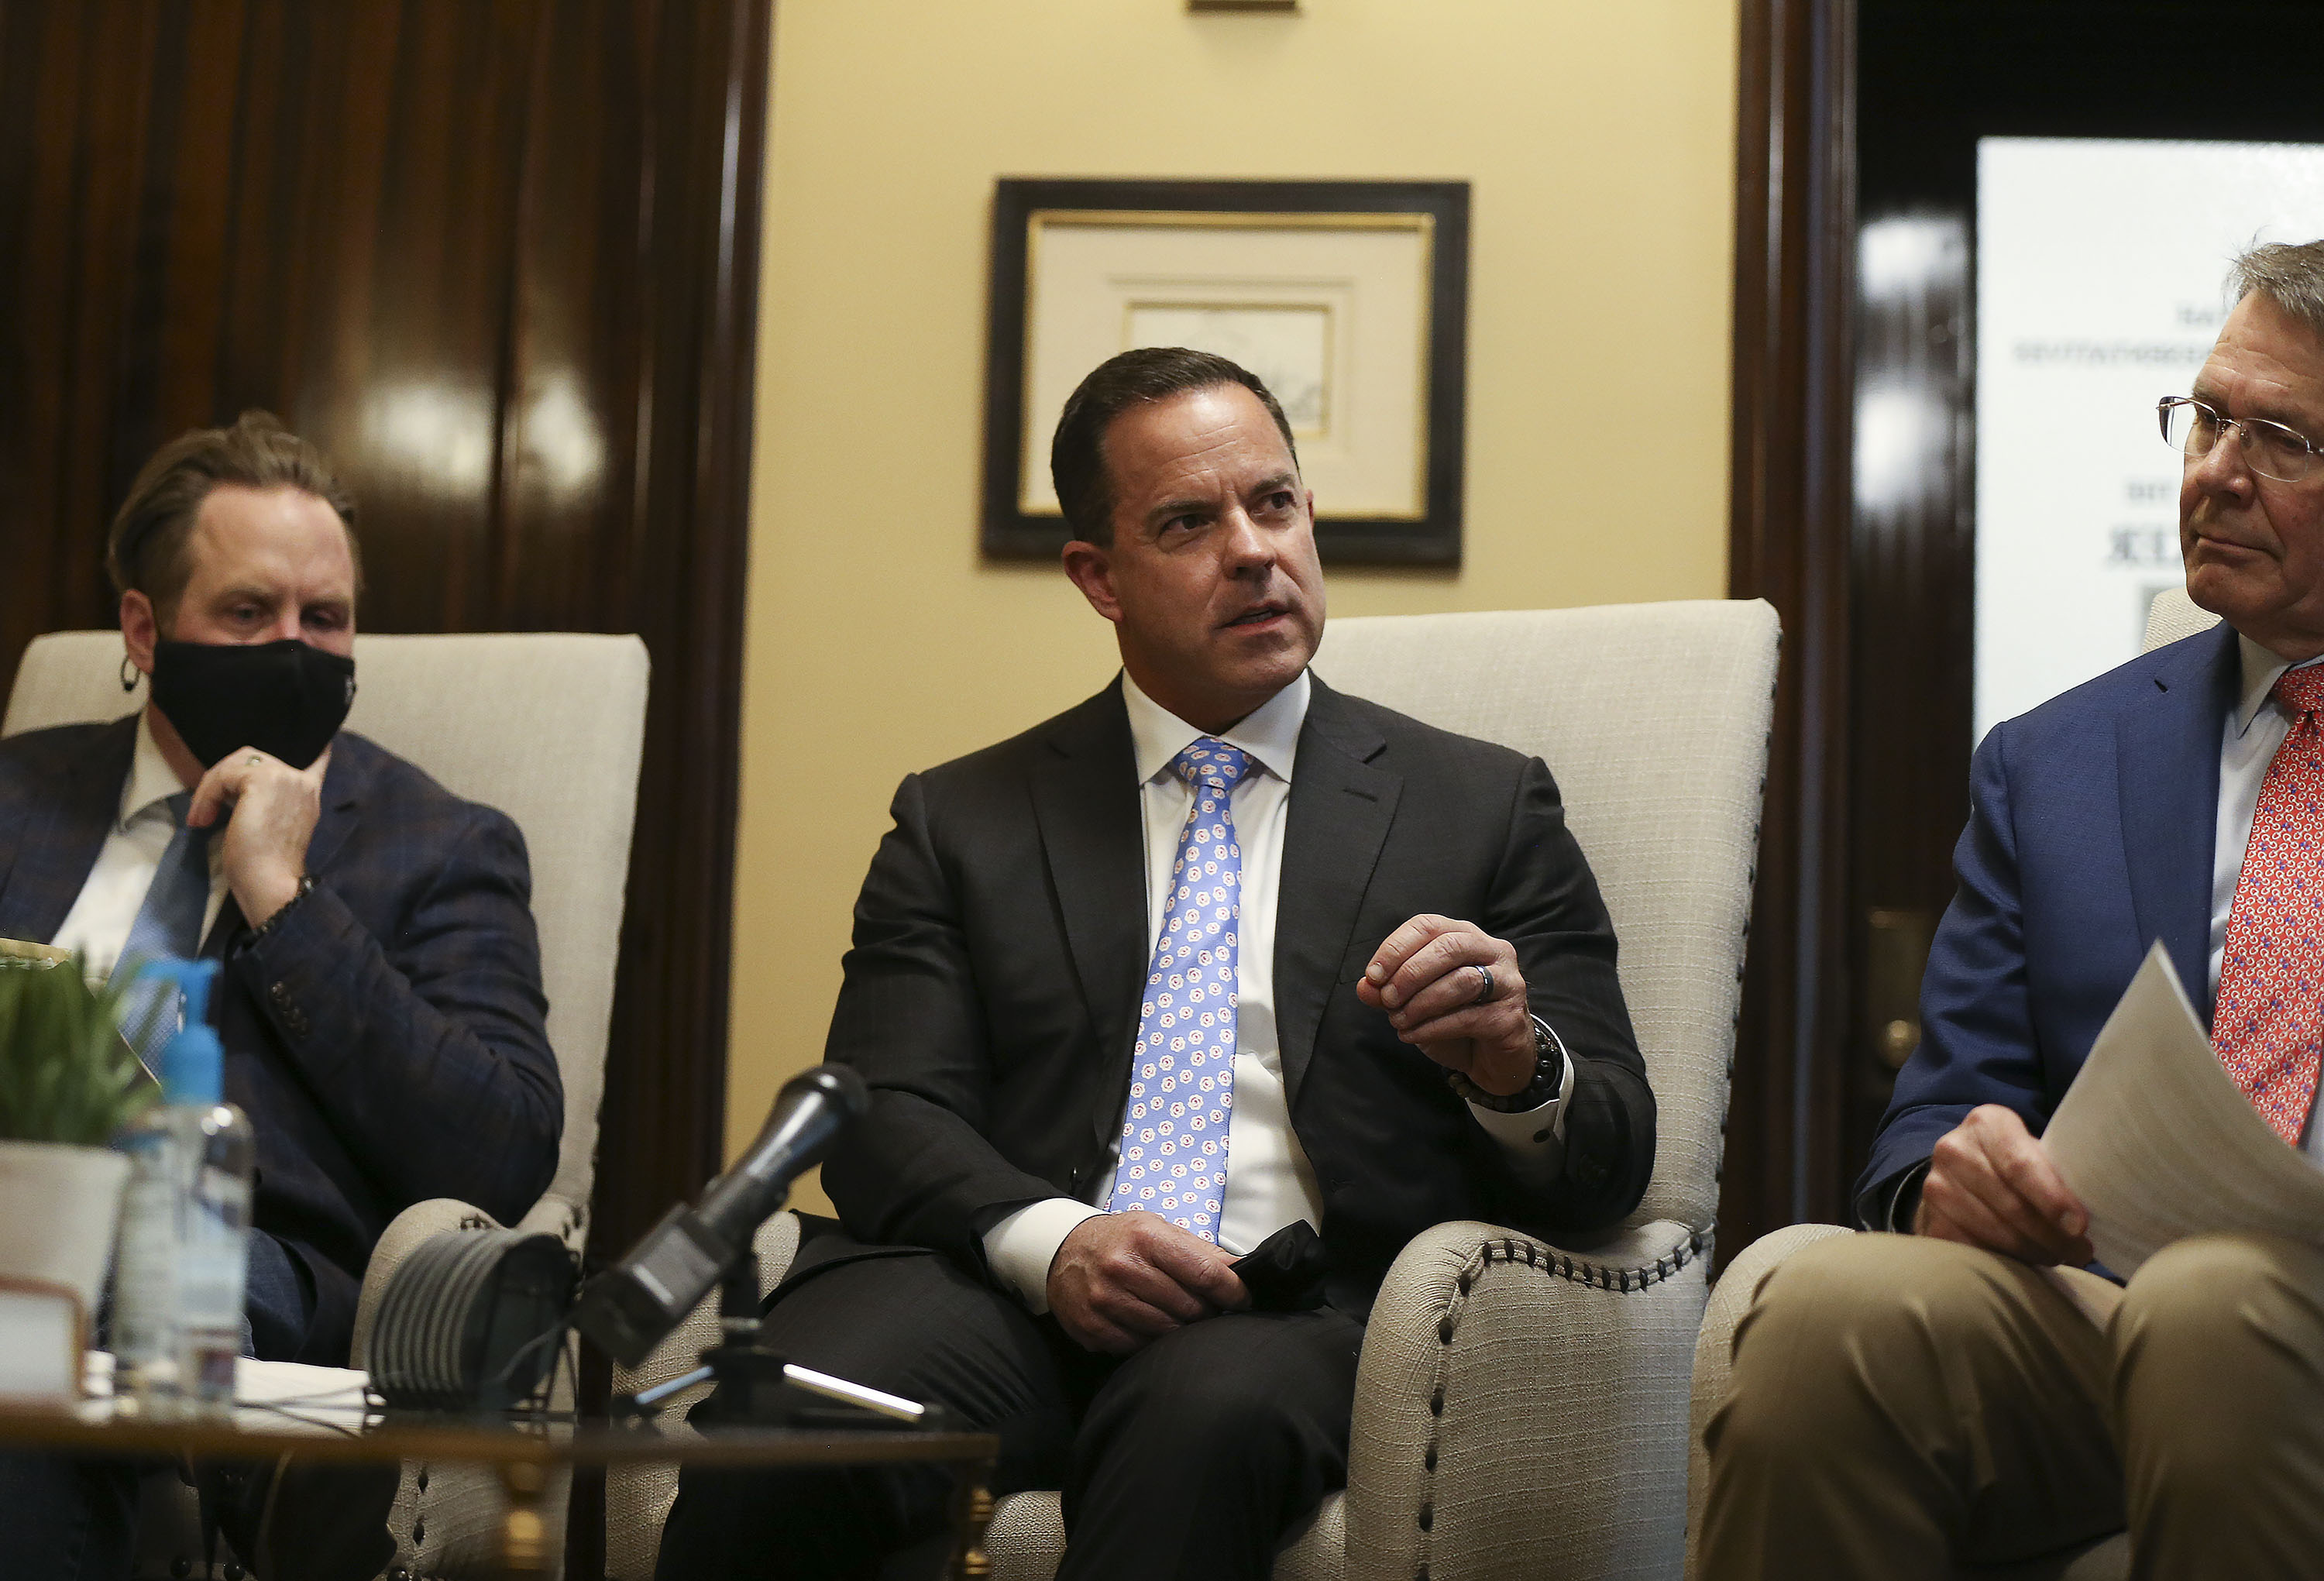 Utah House Speaker Brad Wilson, R-Kaysville, center, center, holds his weekly media availability with Rep. Jefferson Moss, R-Saratoga Springs, left, and Rep. Brad Last, R-Hurricane, right, during the Utah Legislature’s 2021 general session.